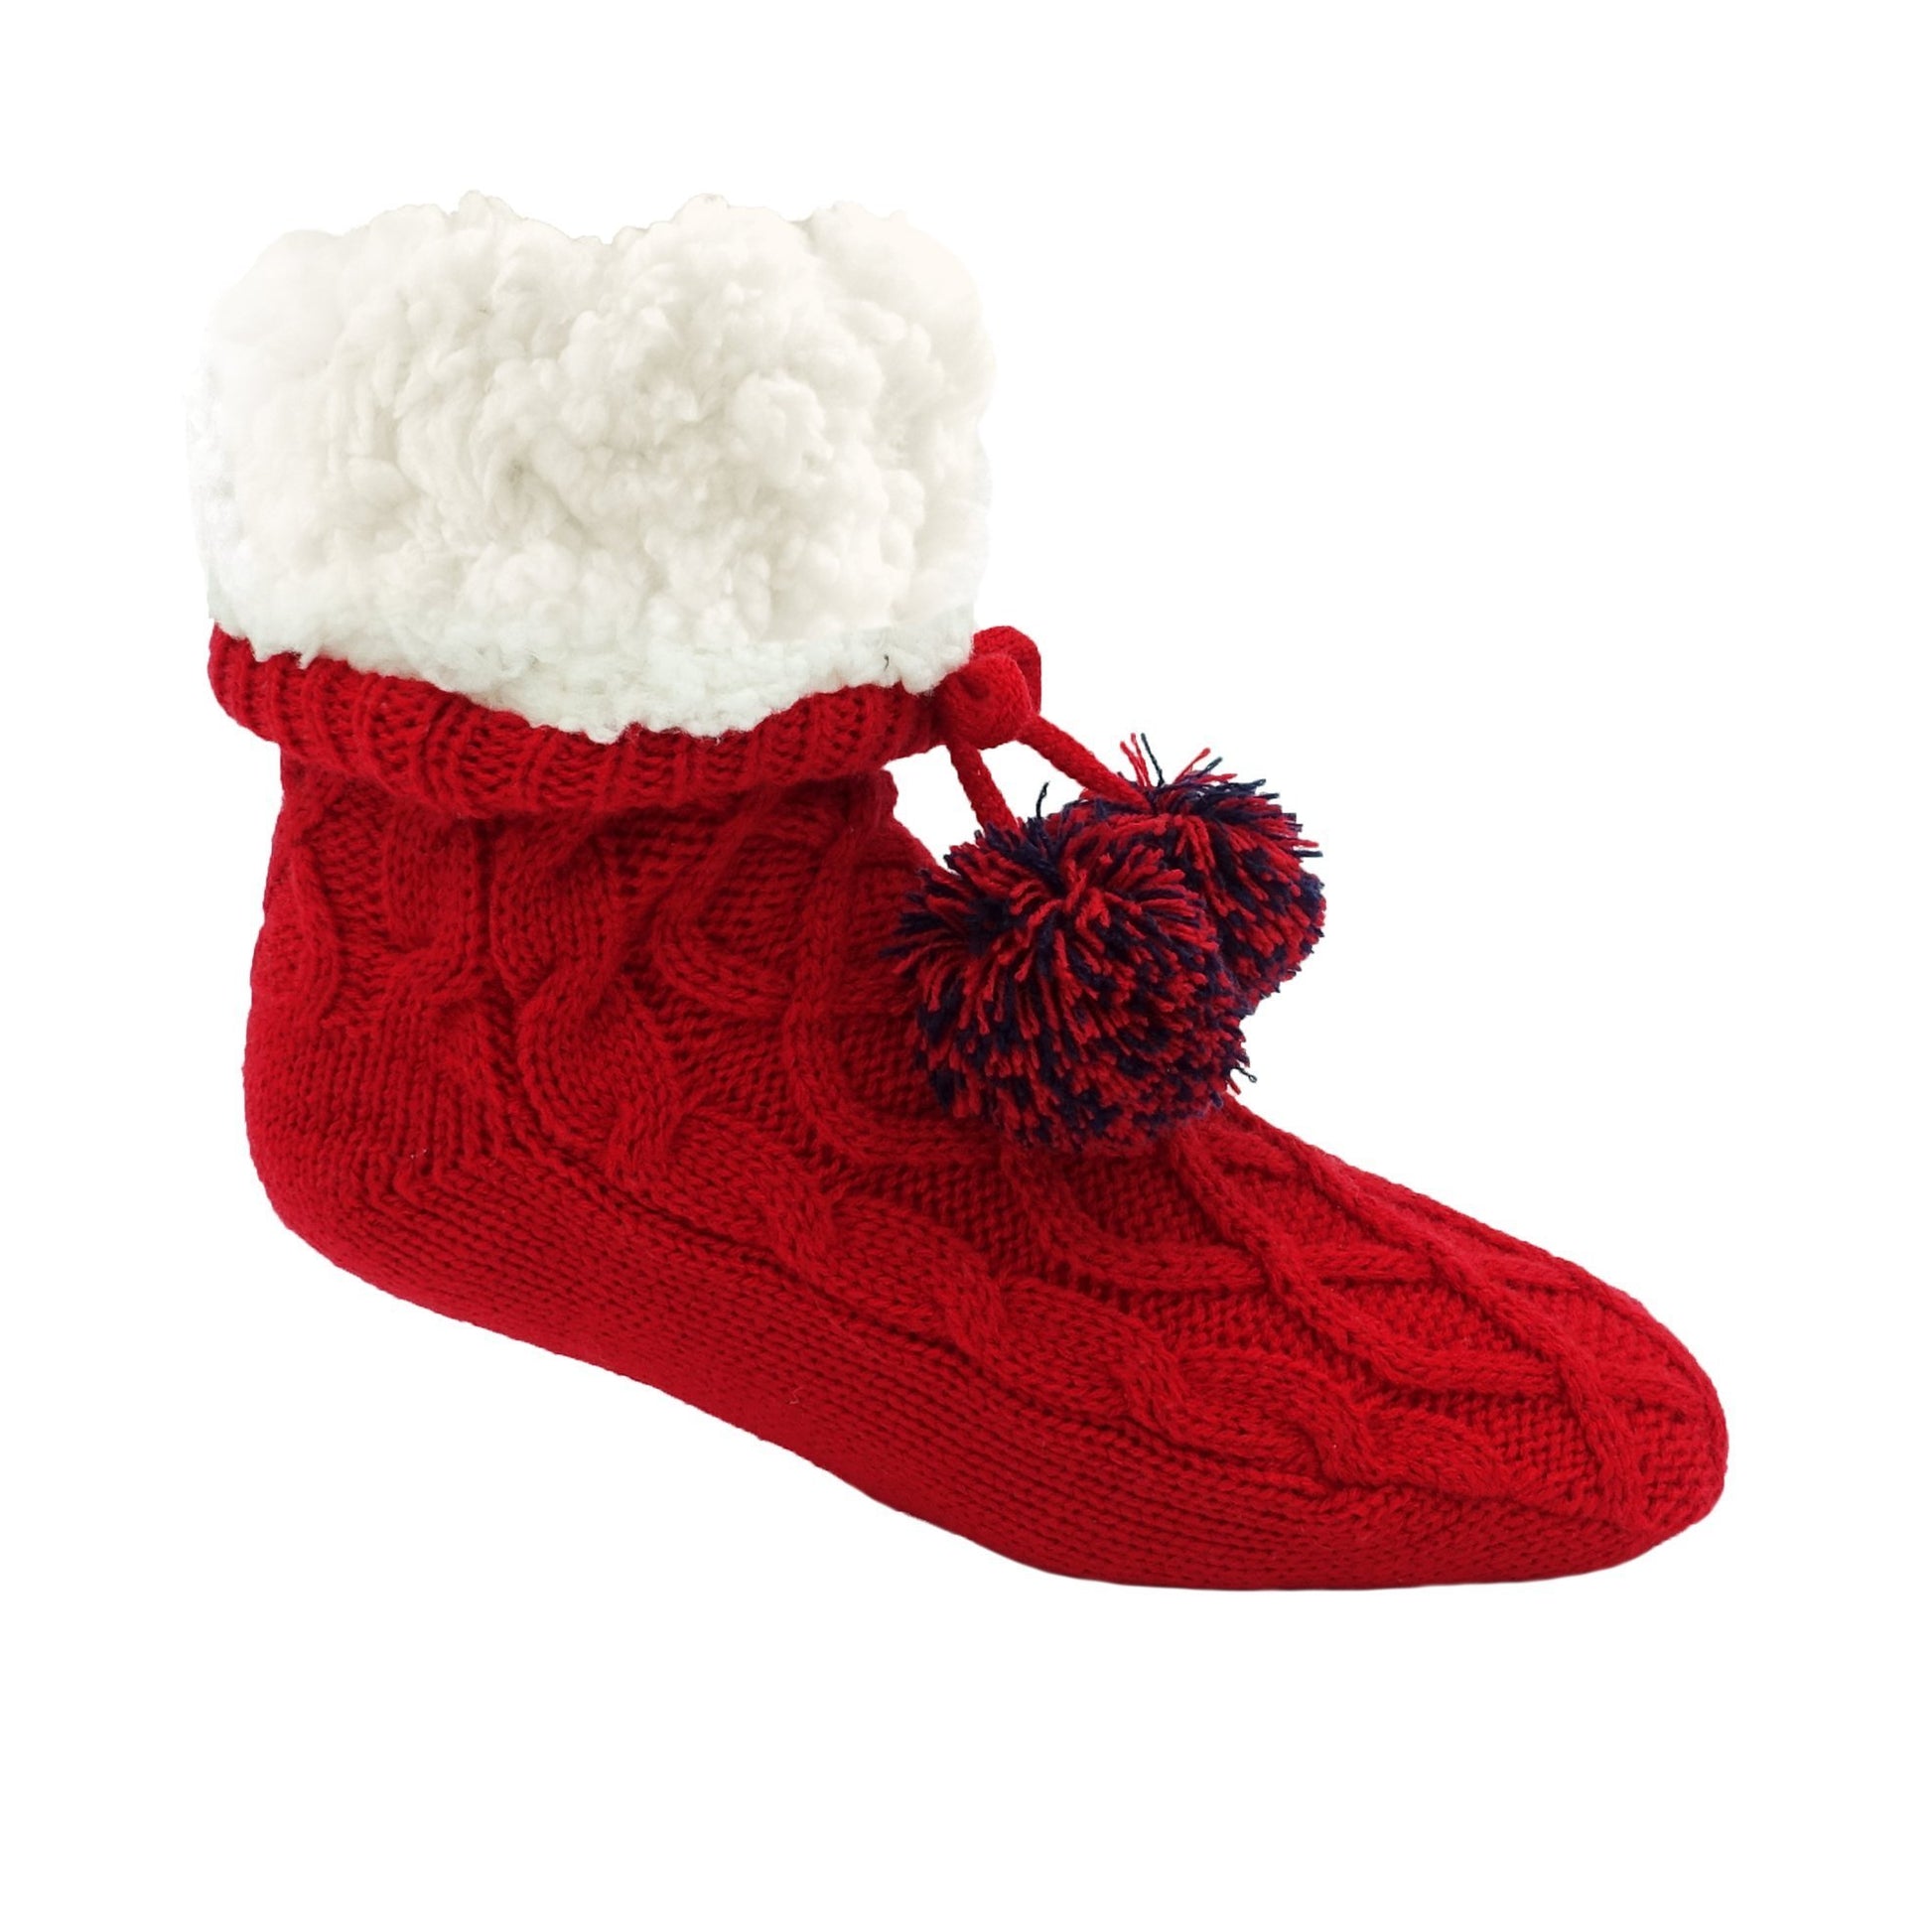 Pudus Winter Cable Knit Slipper Socks for Women and Men with Non-Slip Grippers and Faux Fur Sherpa Fleece Lining - Adult Regular Fuzzy Socks Cable Knit Red - Classic Slipper Sock